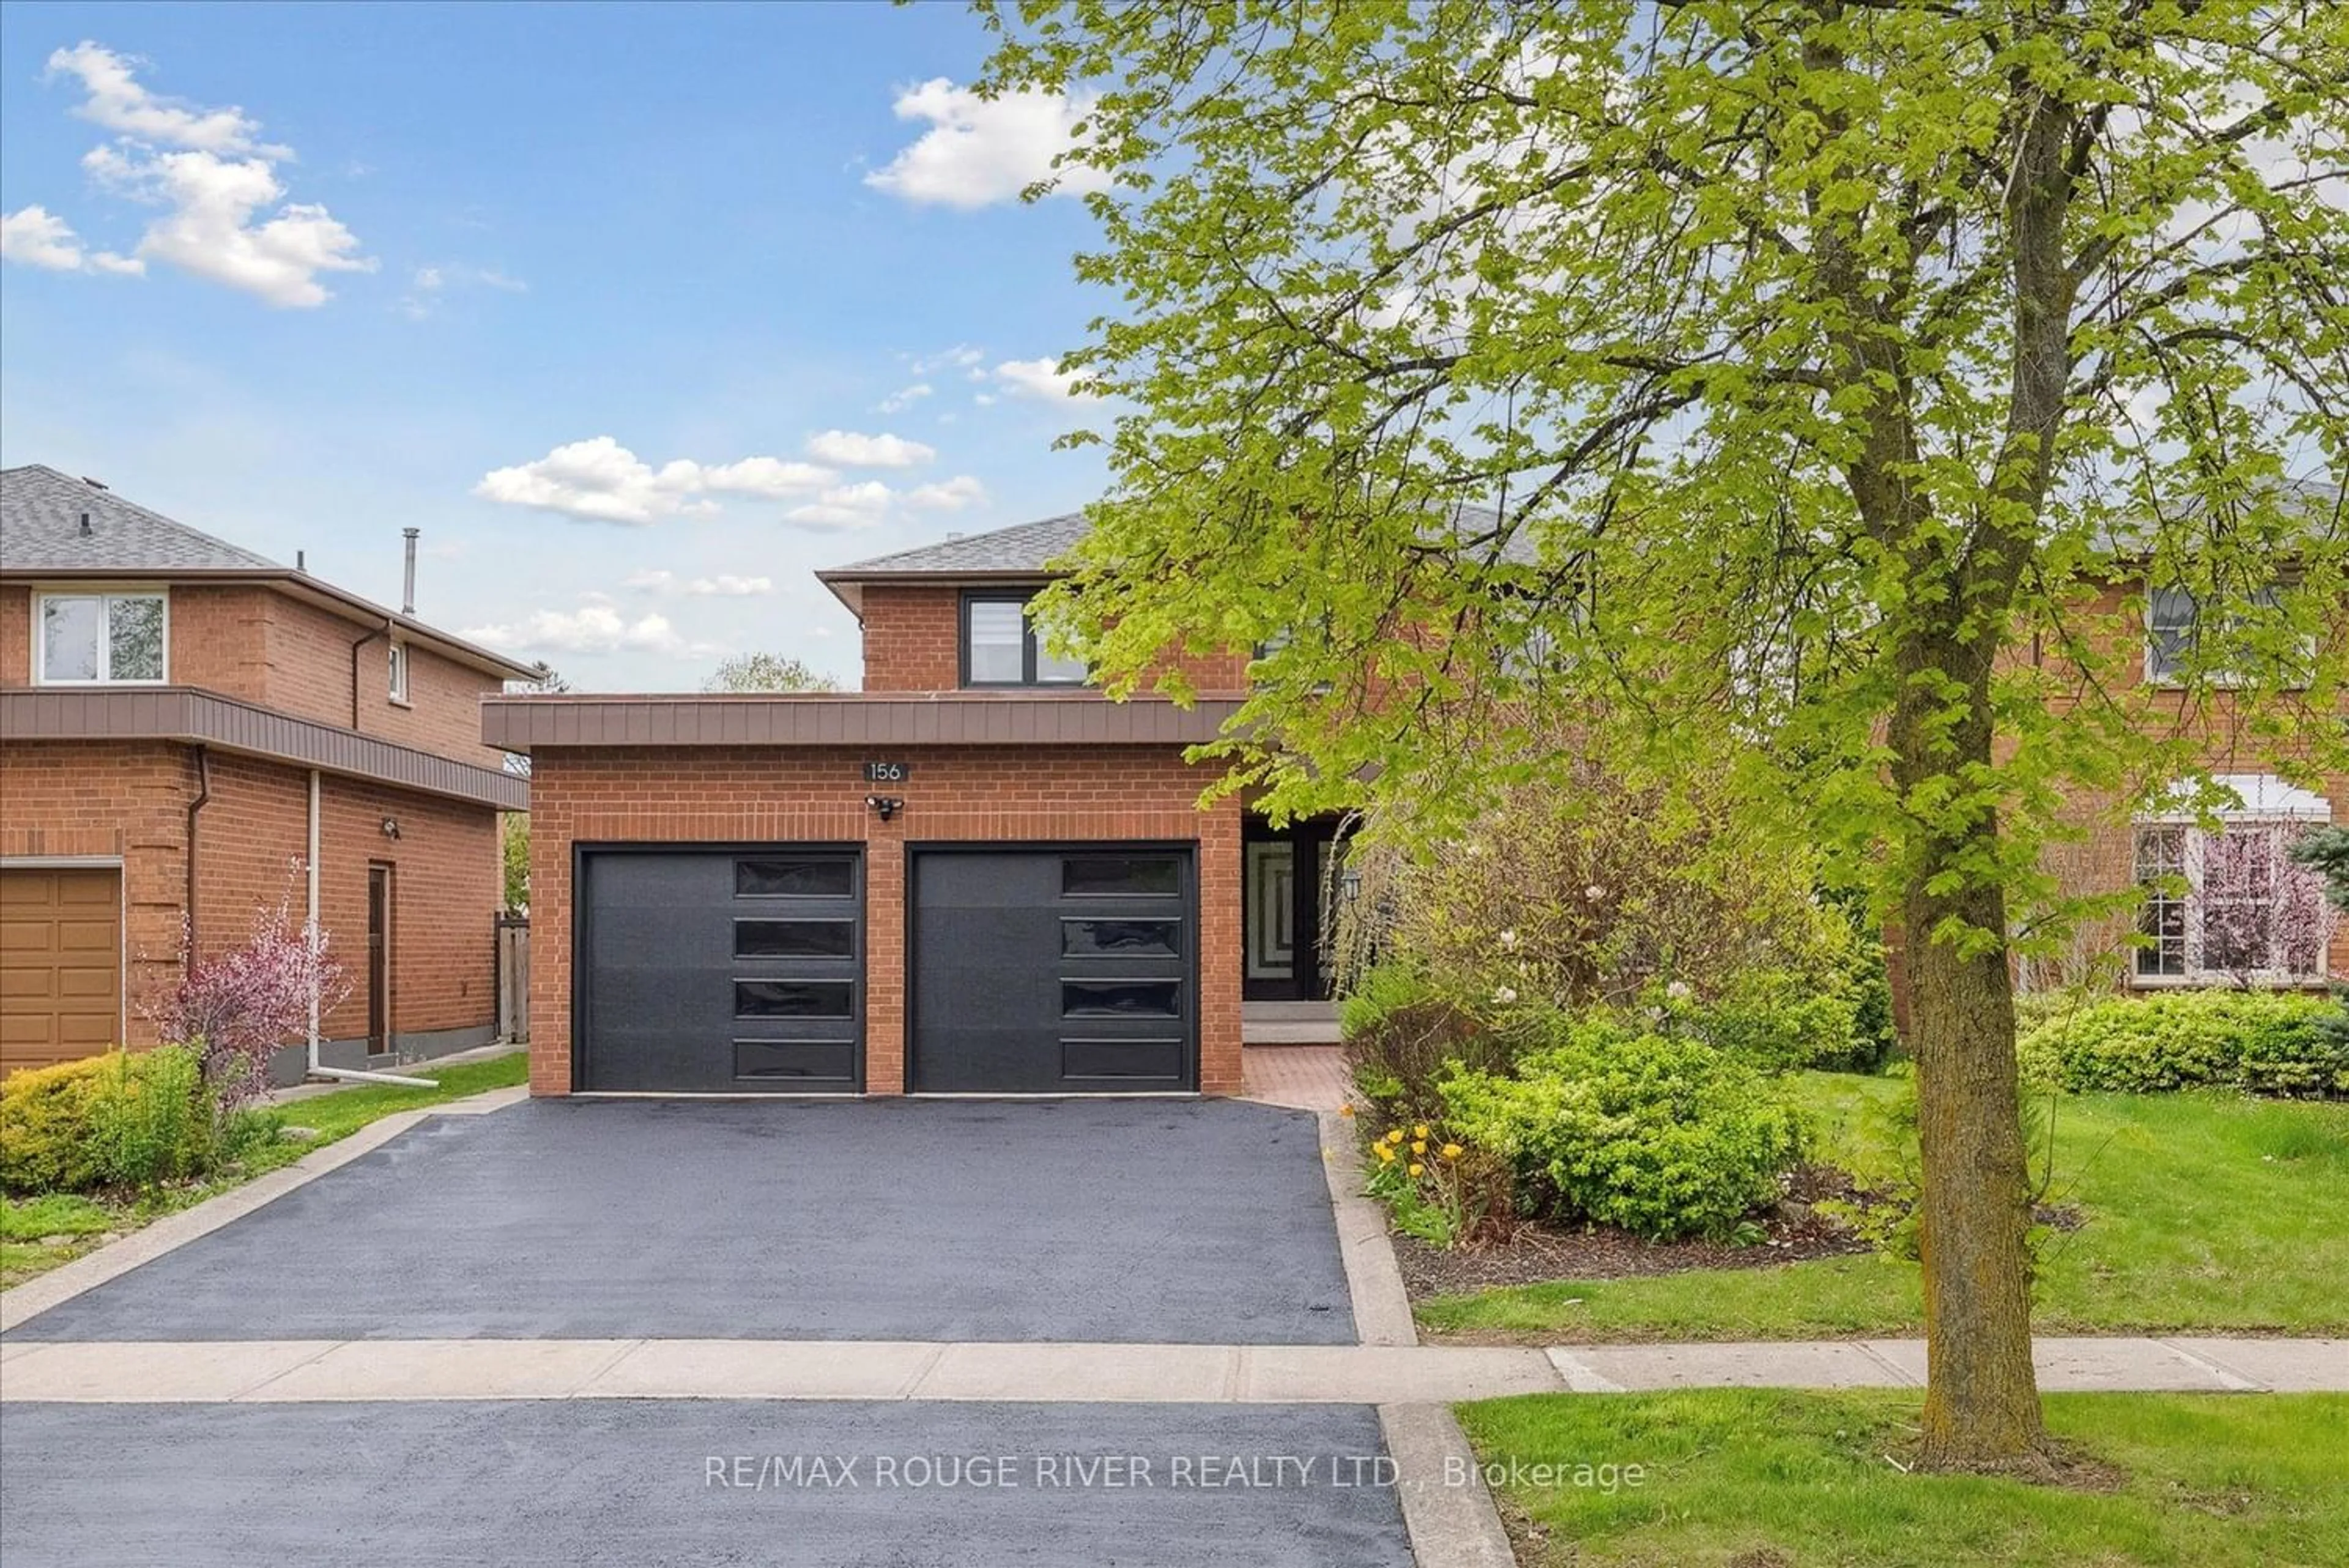 Home with brick exterior material for 156 Beechnut Rd, Vaughan Ontario L4L 6T6